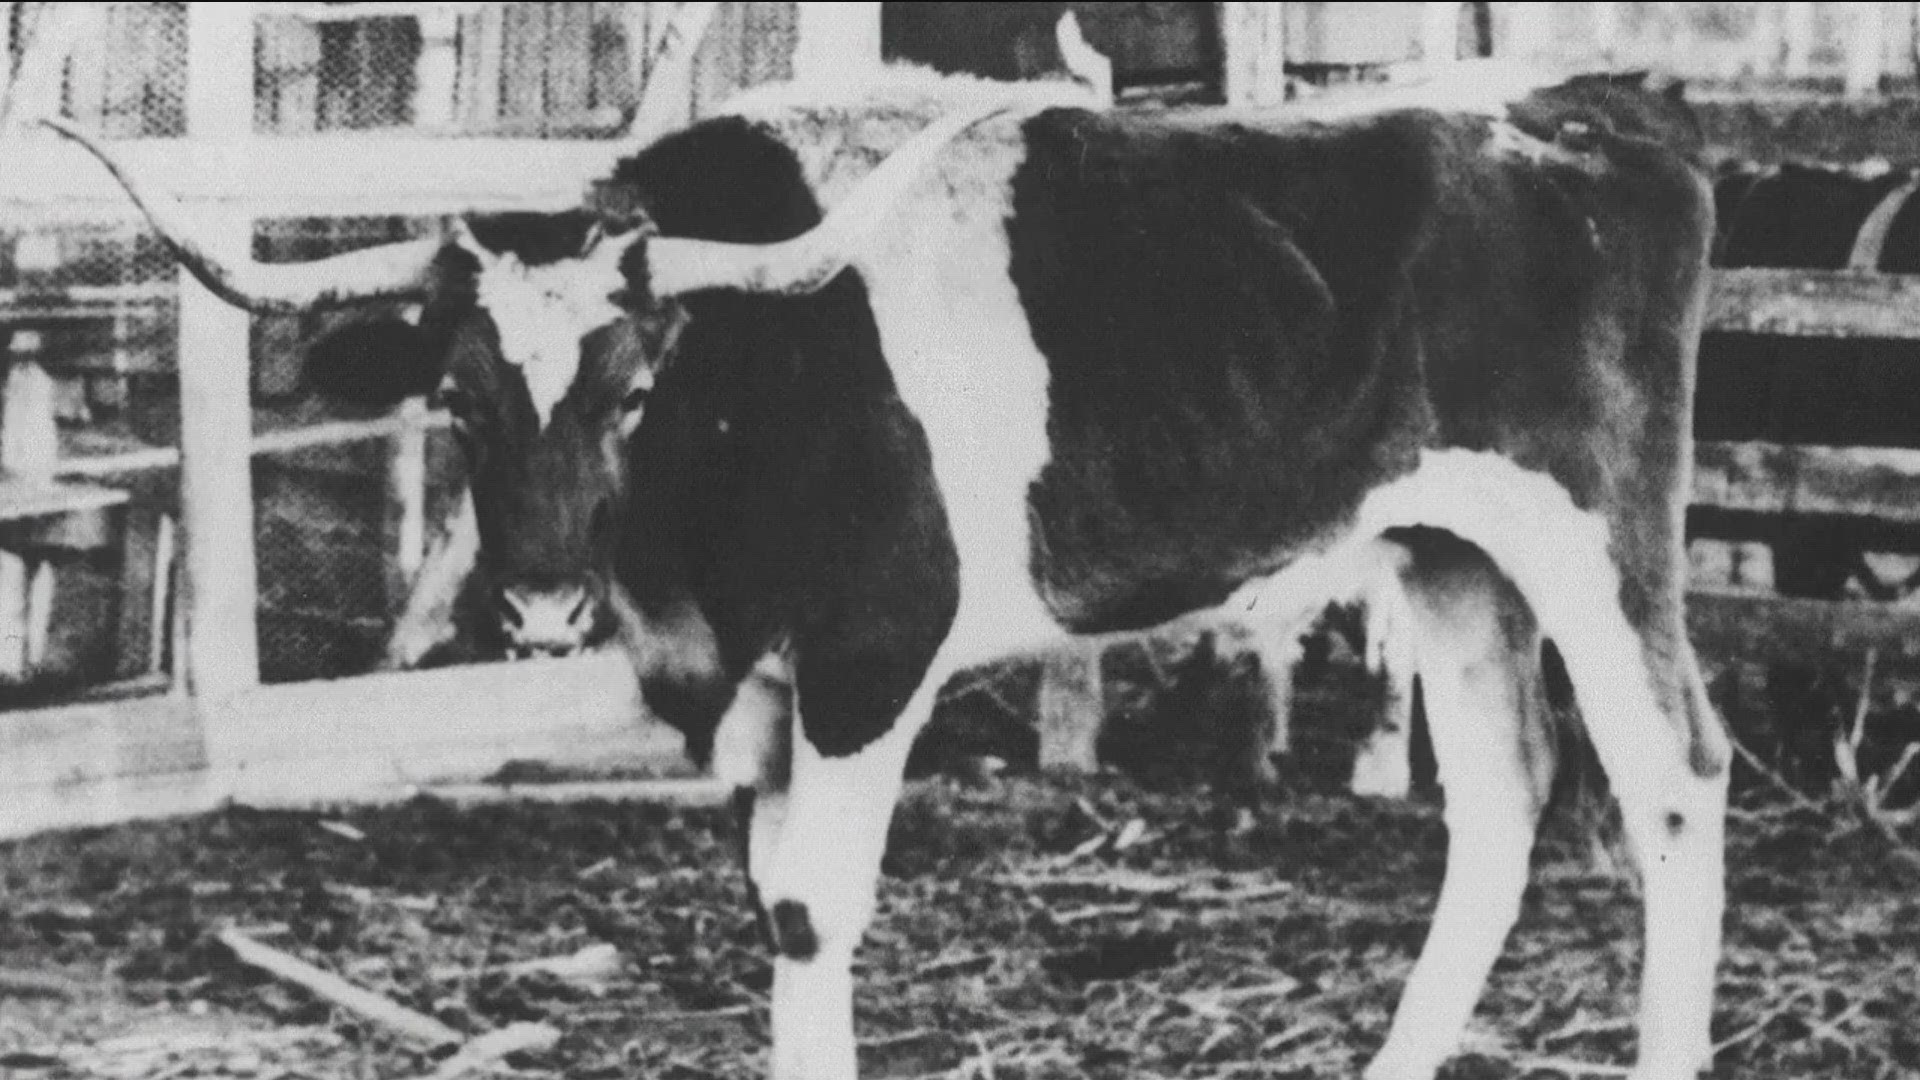 The tradition of Bevo traces back more than 100 years.